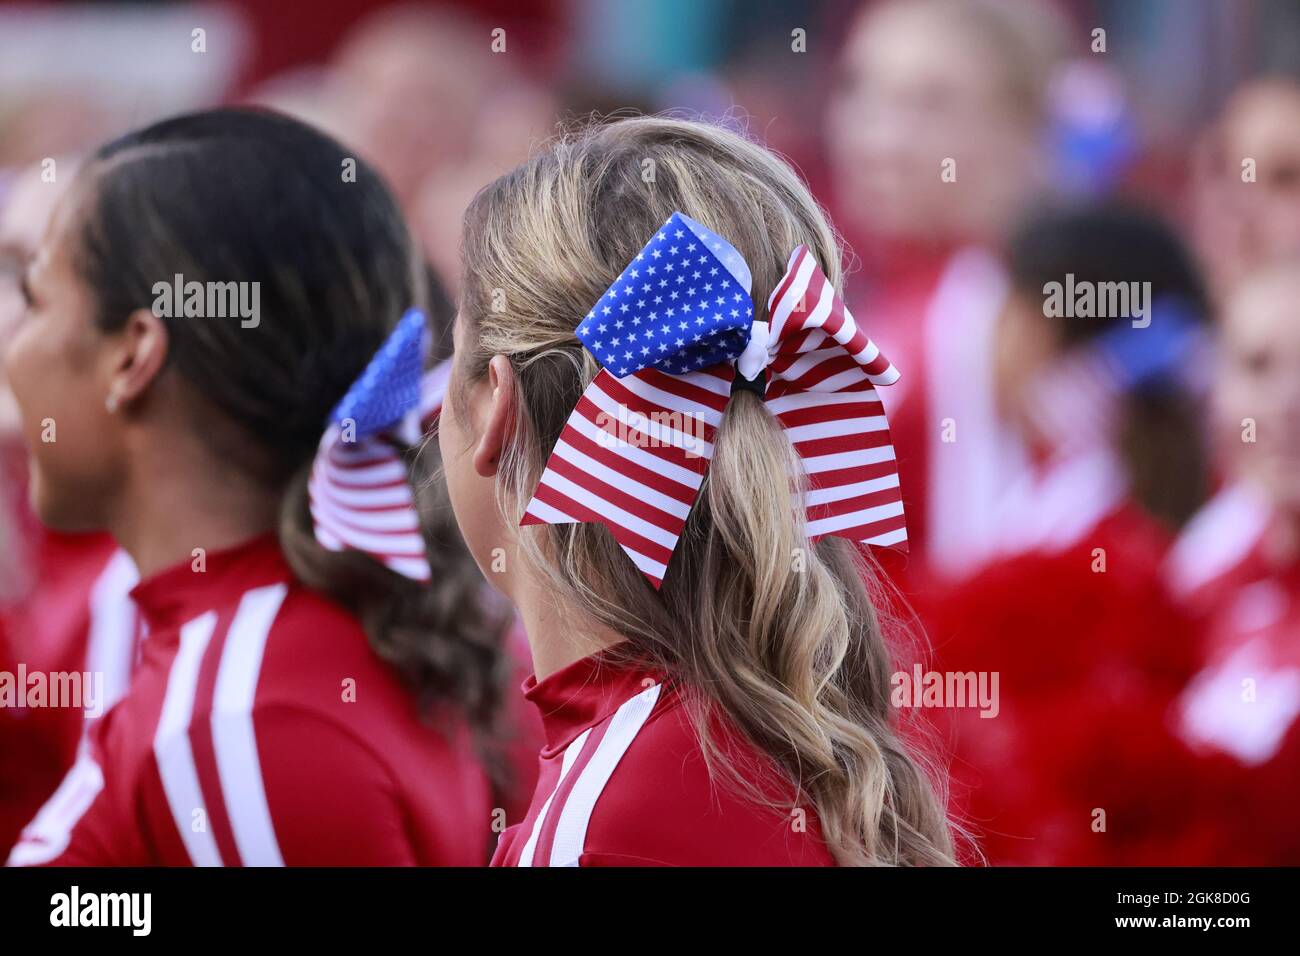 BLOOMINGTON, UNITED STATES - 2021/09/11: Indiana University cheerleaders wear American flag ribbons in their hair on the anniversary of 9/11 before IU plays against Idaho during an NCAA football game on September 11, 2021 at Memorial Stadium in Bloomington, Ind. The Hoosiers beat the Vandals 56-14. Stock Photo